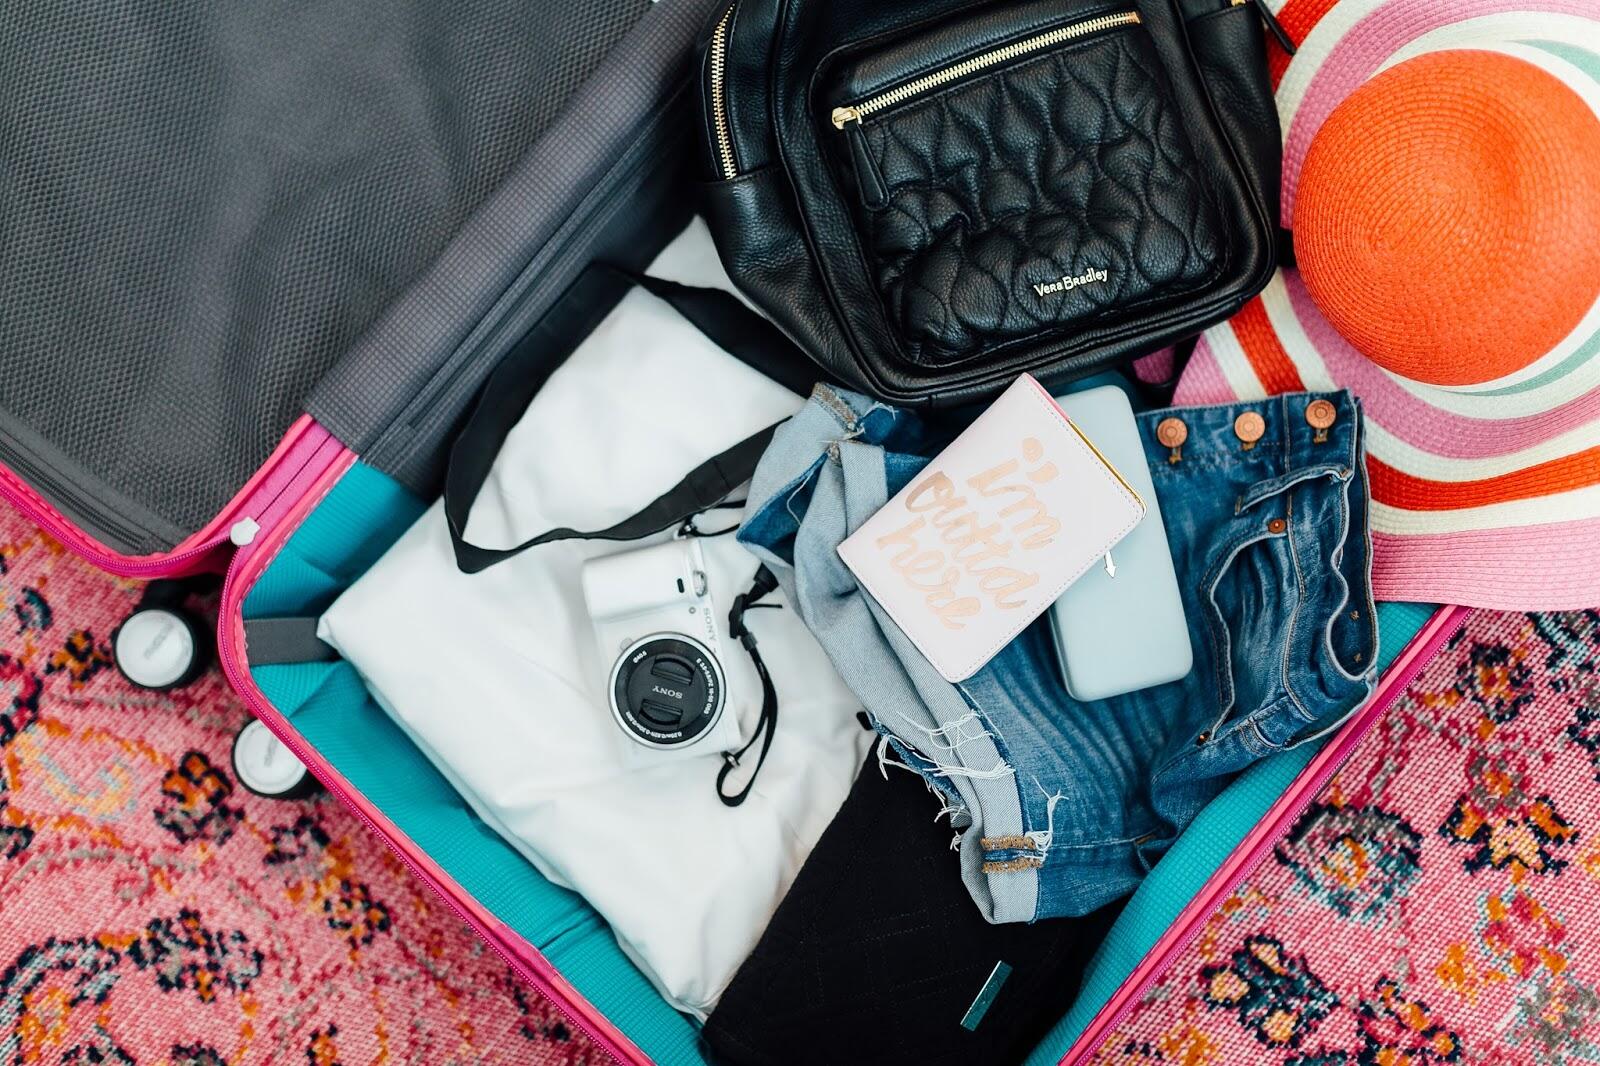  The Ultimate Packing Checklist for an International Trip by popular blogger Walking in Memphis in High Heels